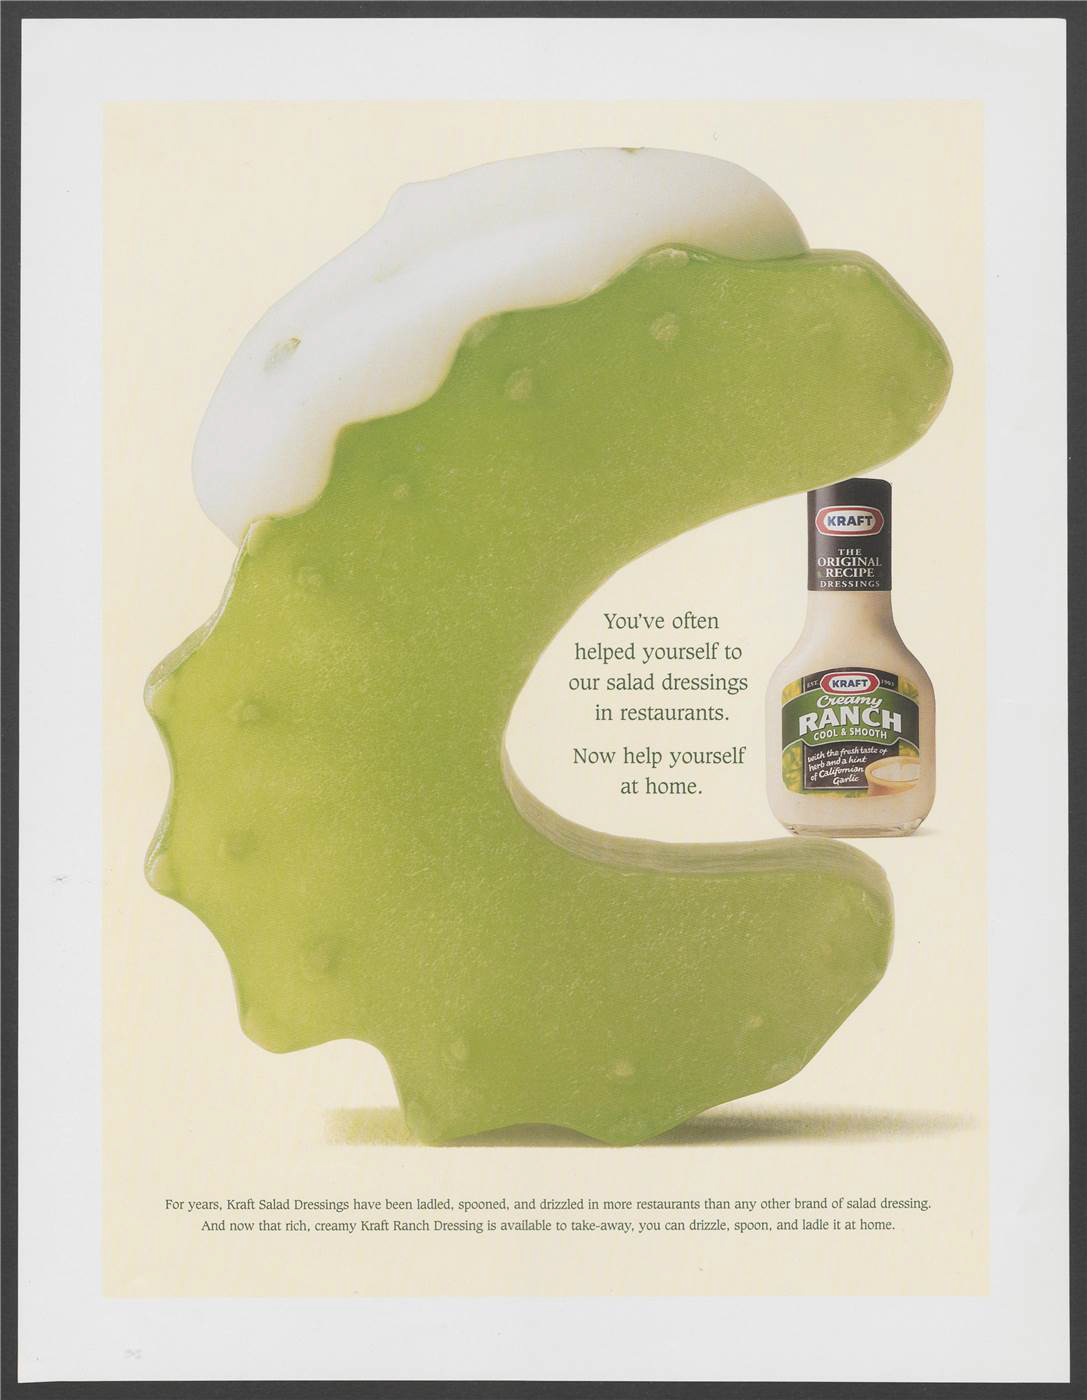 "You've often helped yourself to our salad dressings in restaurants. Now help yourself at home." A piece of celery is shown coated in ranch dressing, framing a bottle of the product. Notes that Kraft's dressing is available in both shops and restaurants.